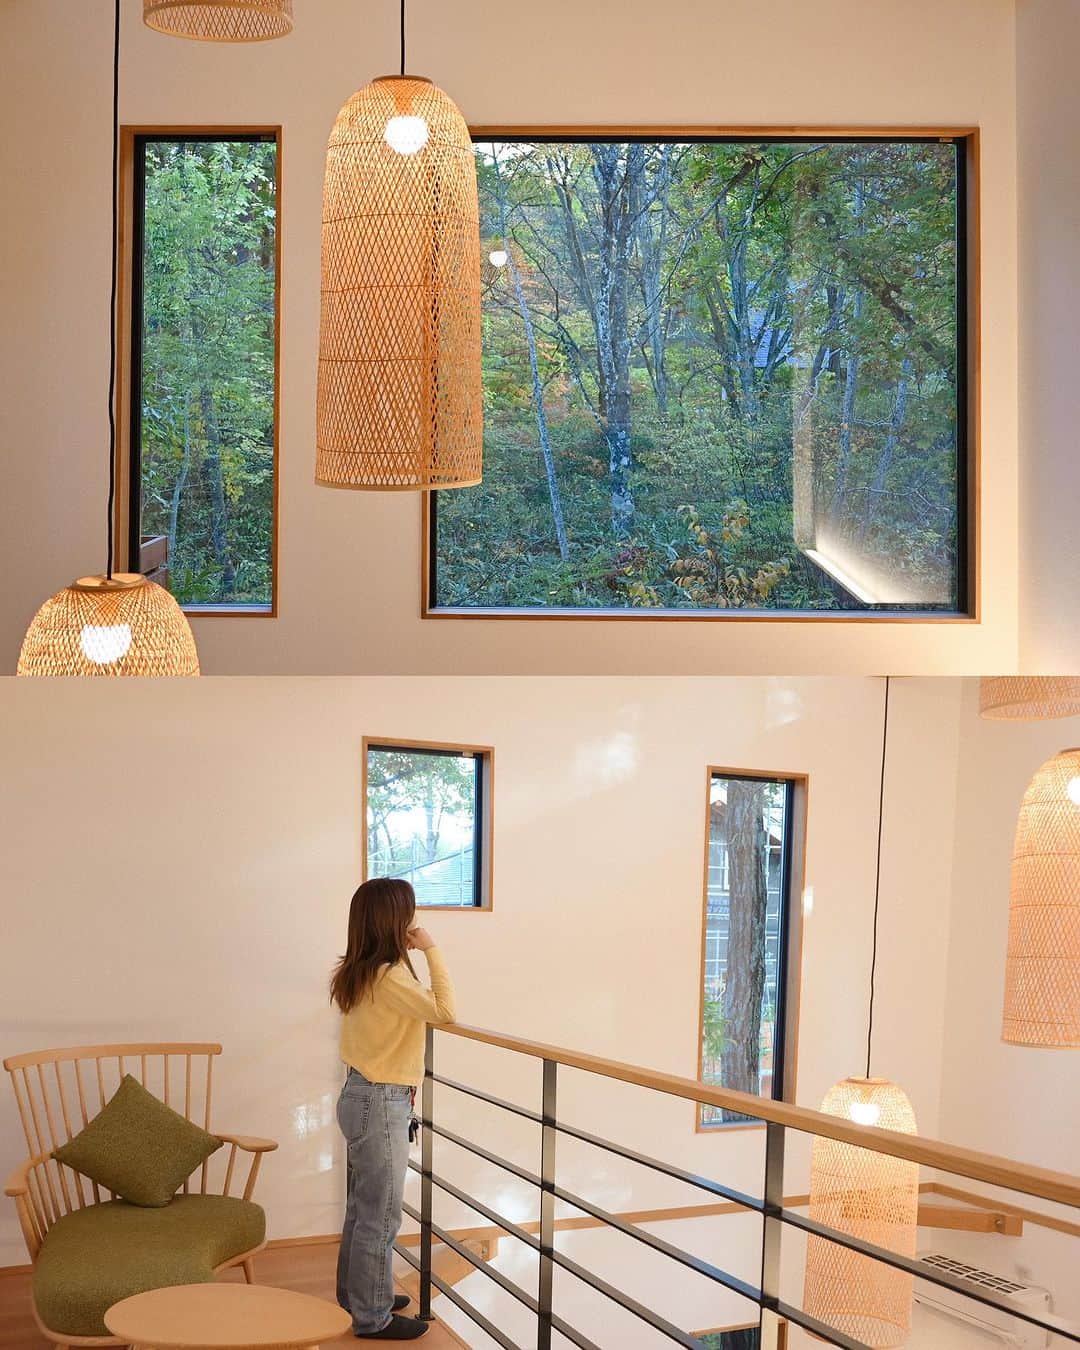 MEGさんのインスタグラム写真 - (MEGInstagram)「⌇Shiki living Akamatsu house in Hakuba 🍂 #hotel_megvlog   心地の良い、ゴージャスな赤松ハウス。 最大8人で泊まれる貸別荘は オーブンや洗濯機、ドライルームまで充実。🛁  大きなキッチンとダイニングテーブルは大人数で料理ができる。 ベッドが６個、パウダールームが3つ。  白馬といえばアウトドアなのに、出掛ける度ホテルに戻りたくなる、ずっと籠っていたいと思うお家。 少しでれば近くにカフェがあり、有名な観光スポット”白馬岩岳マウンテンリゾート“までは車で11分。 夜は綺麗な星が見れるのも魅力溢れる街。  ウィンターシーズンが人気な白馬だけどグリーンシーズンは大自然に囲まれて、空気も気持ち良くて定期的に訪れたい。 季節によって違う楽しみ方がある。  Comfortable and gorgeous Akamatsu House. #Vacation rentals that can accommodate up to 8 people ed with oven, washing machine, and dry room. 🛁  The large kitchen and dining table allow you to cook for a large number of people. There are 6 beds and 3 powder rooms.  Hakuba is all about the outdoors, but every time I go out, I want to go back to the hotel, a house I want to stay in forever. There is a cafe nearby if you go a little further, and the famous tourist spot "Hakuba Iwatake Mountain Resort" is an 11-minute drive away. It is a charming city where you can see beautiful stars at night.  There are different ways to enjoy it depending on the season.  📍長野県北安曇郡白馬村北城830-25 Nagano,Japan   #白馬 #PR @shikiliving #白馬旅行 #ホテル #貸別荘 #国内旅行  #白馬貸別荘 #白馬トラベル  #shikiliving #vacationrental #hakubaaccommodationl #hotel」11月2日 19時51分 - _meg_7